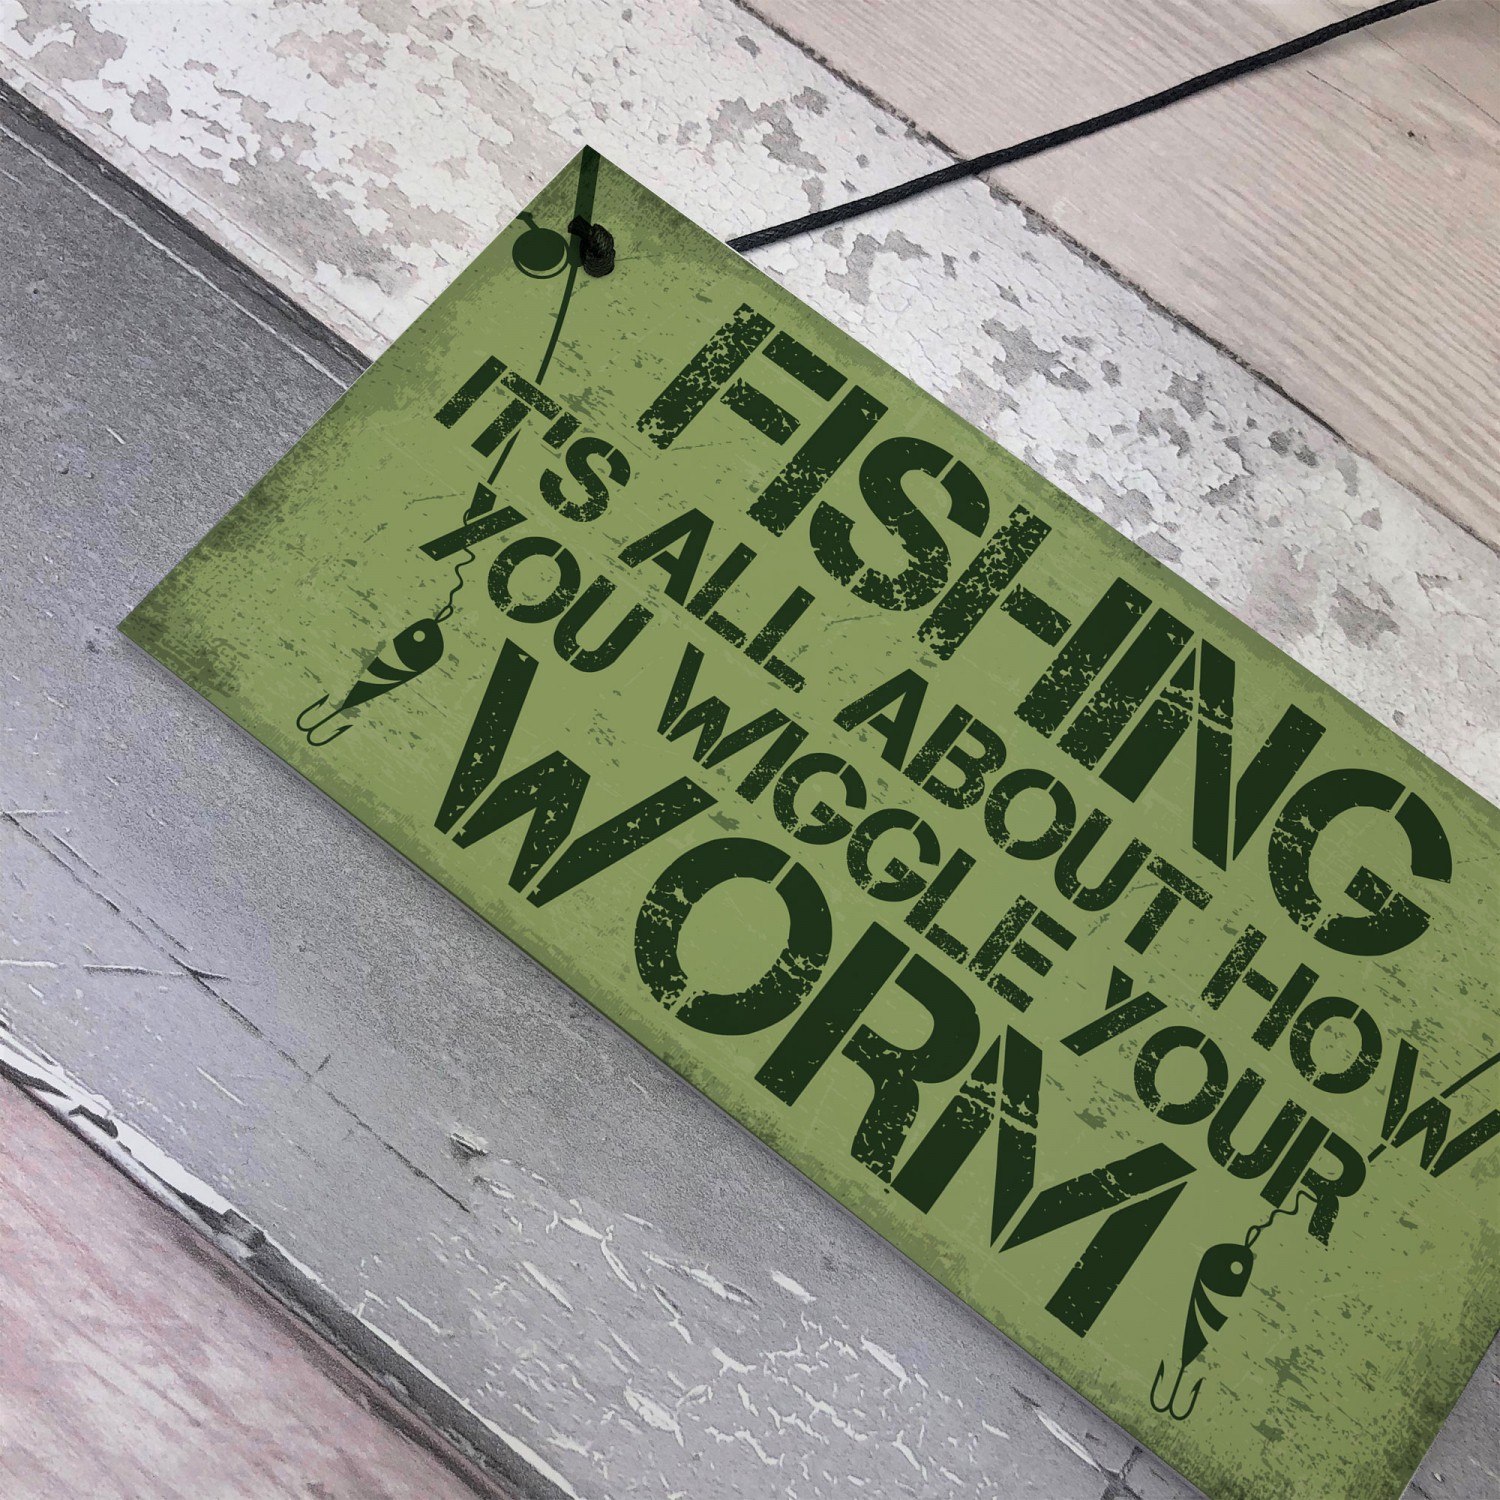 Gone Fishing Sign Plaque Funny Fishing Gifts For Men Man Cave Shed Garage  Plaque